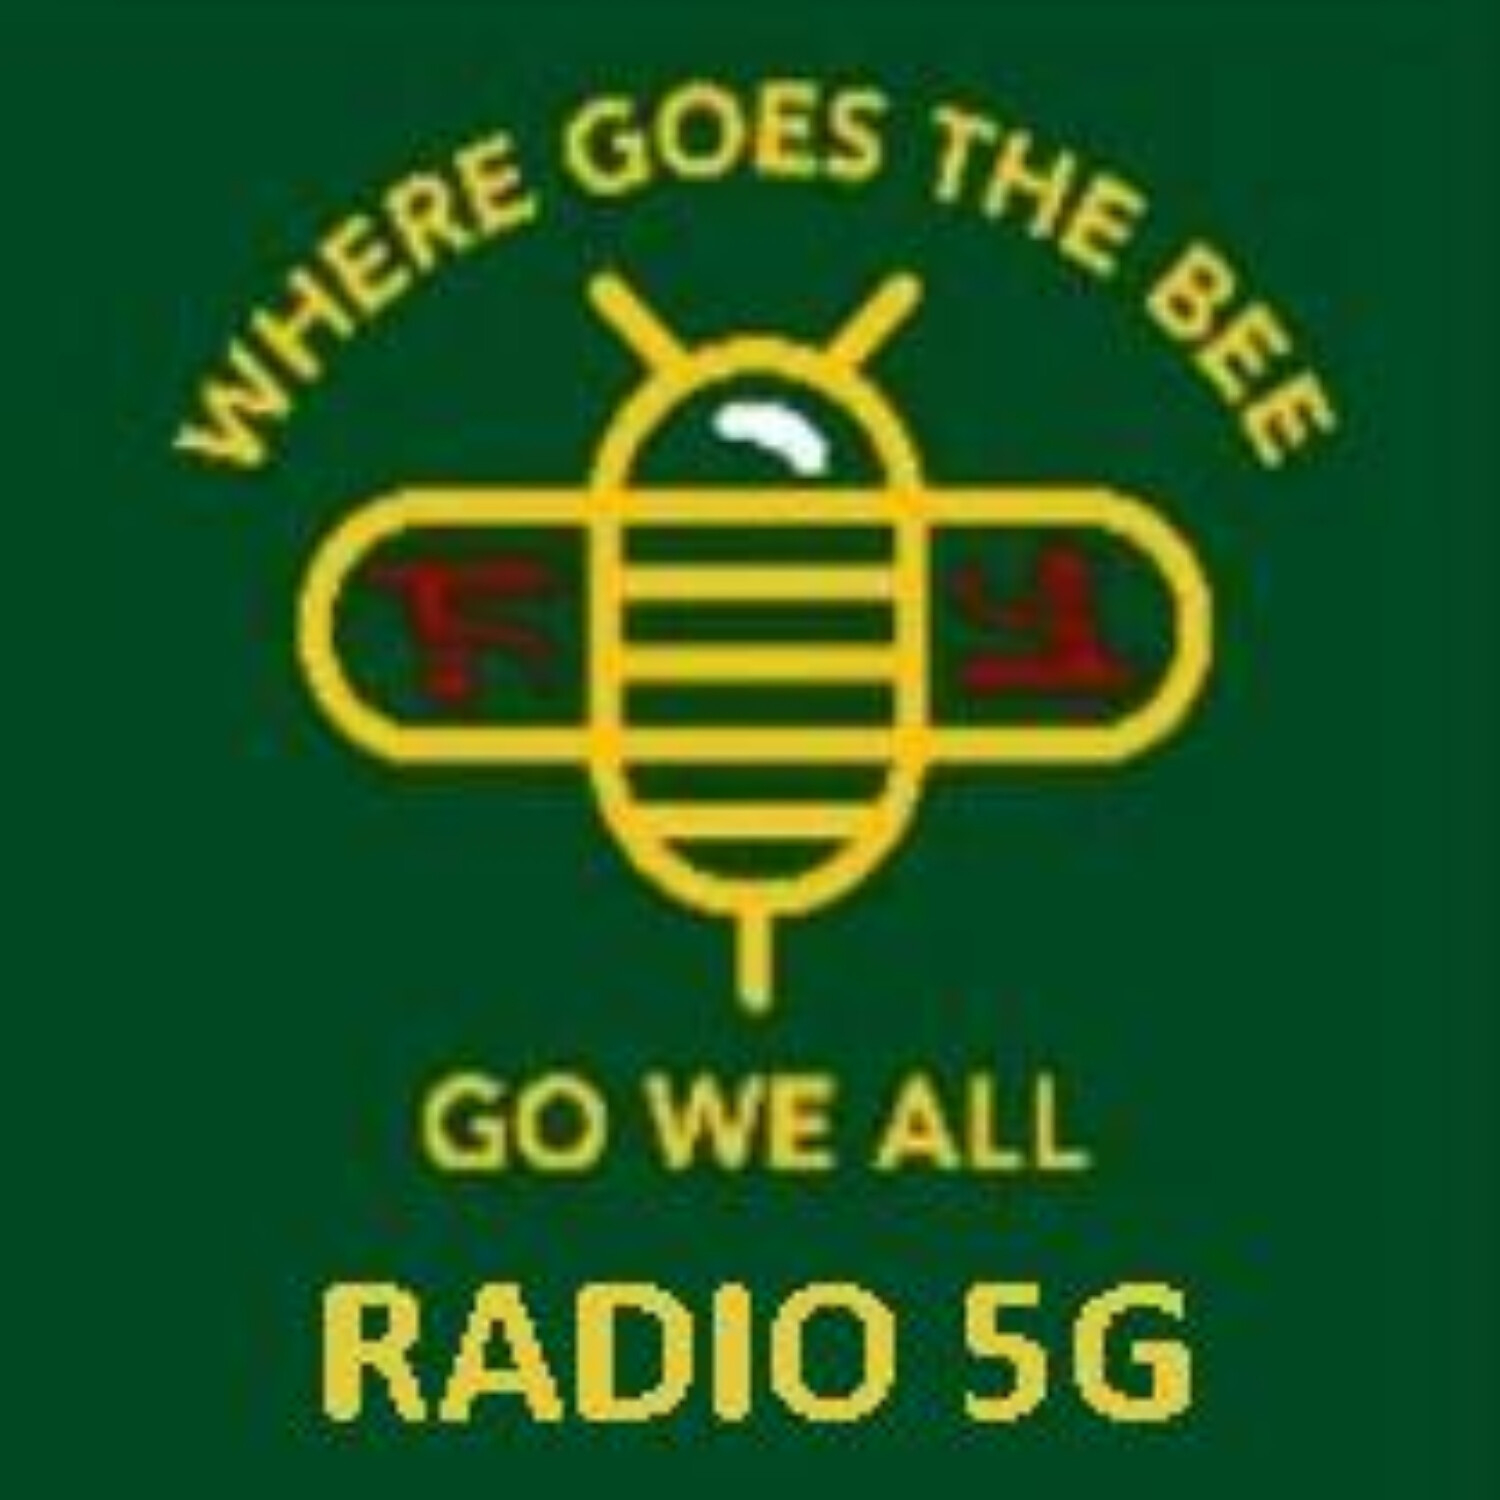 “RADIO 5G” 2/2/22 - Structure of the Deep State